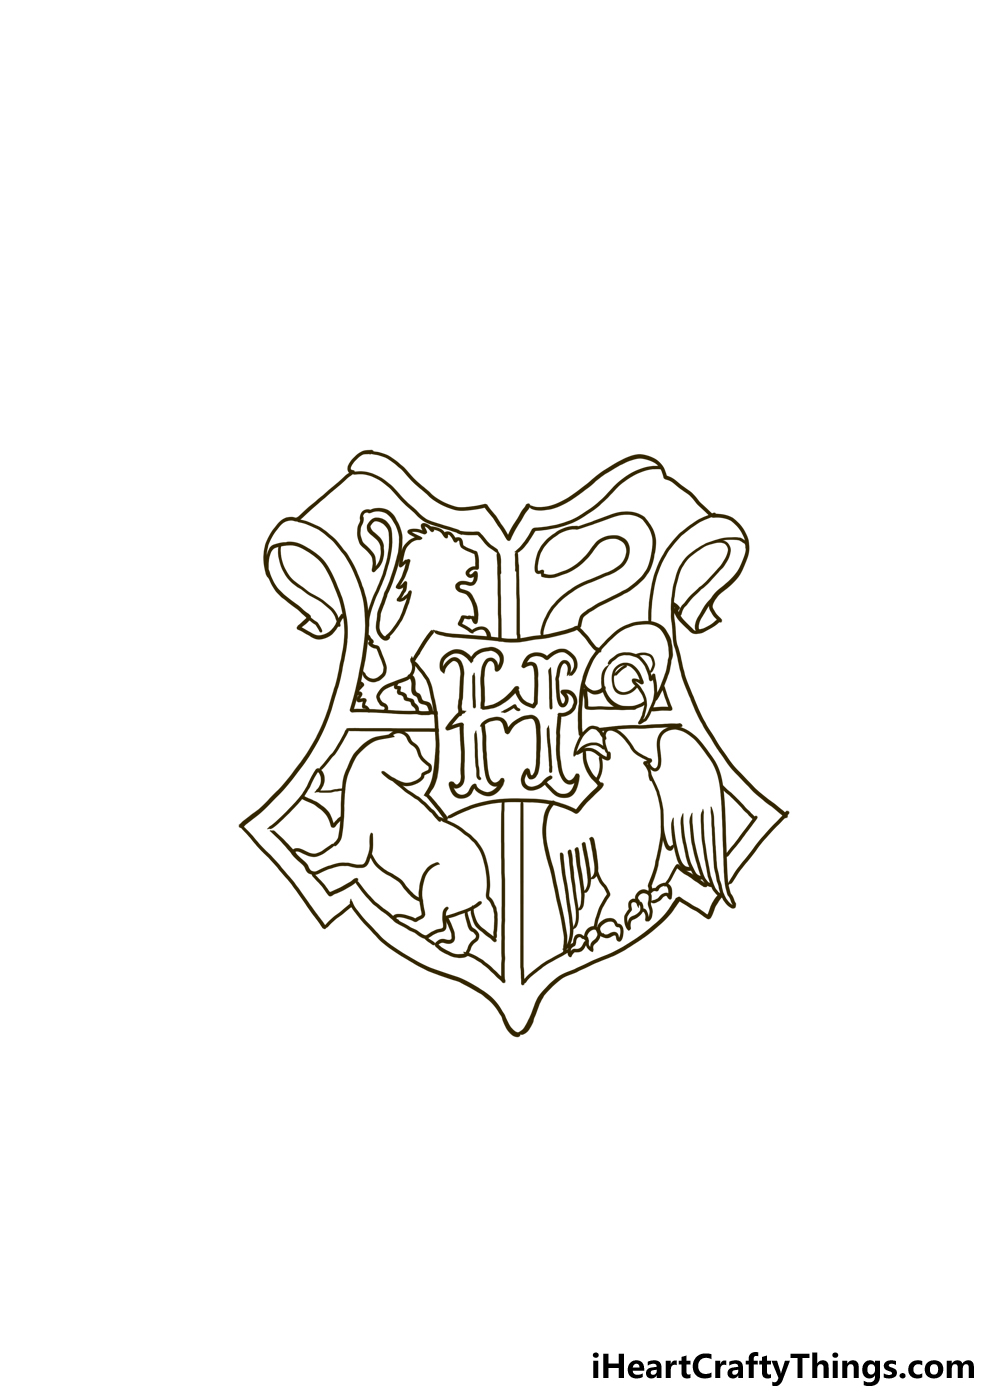 How to Draw the Hogwarts Crest step 3